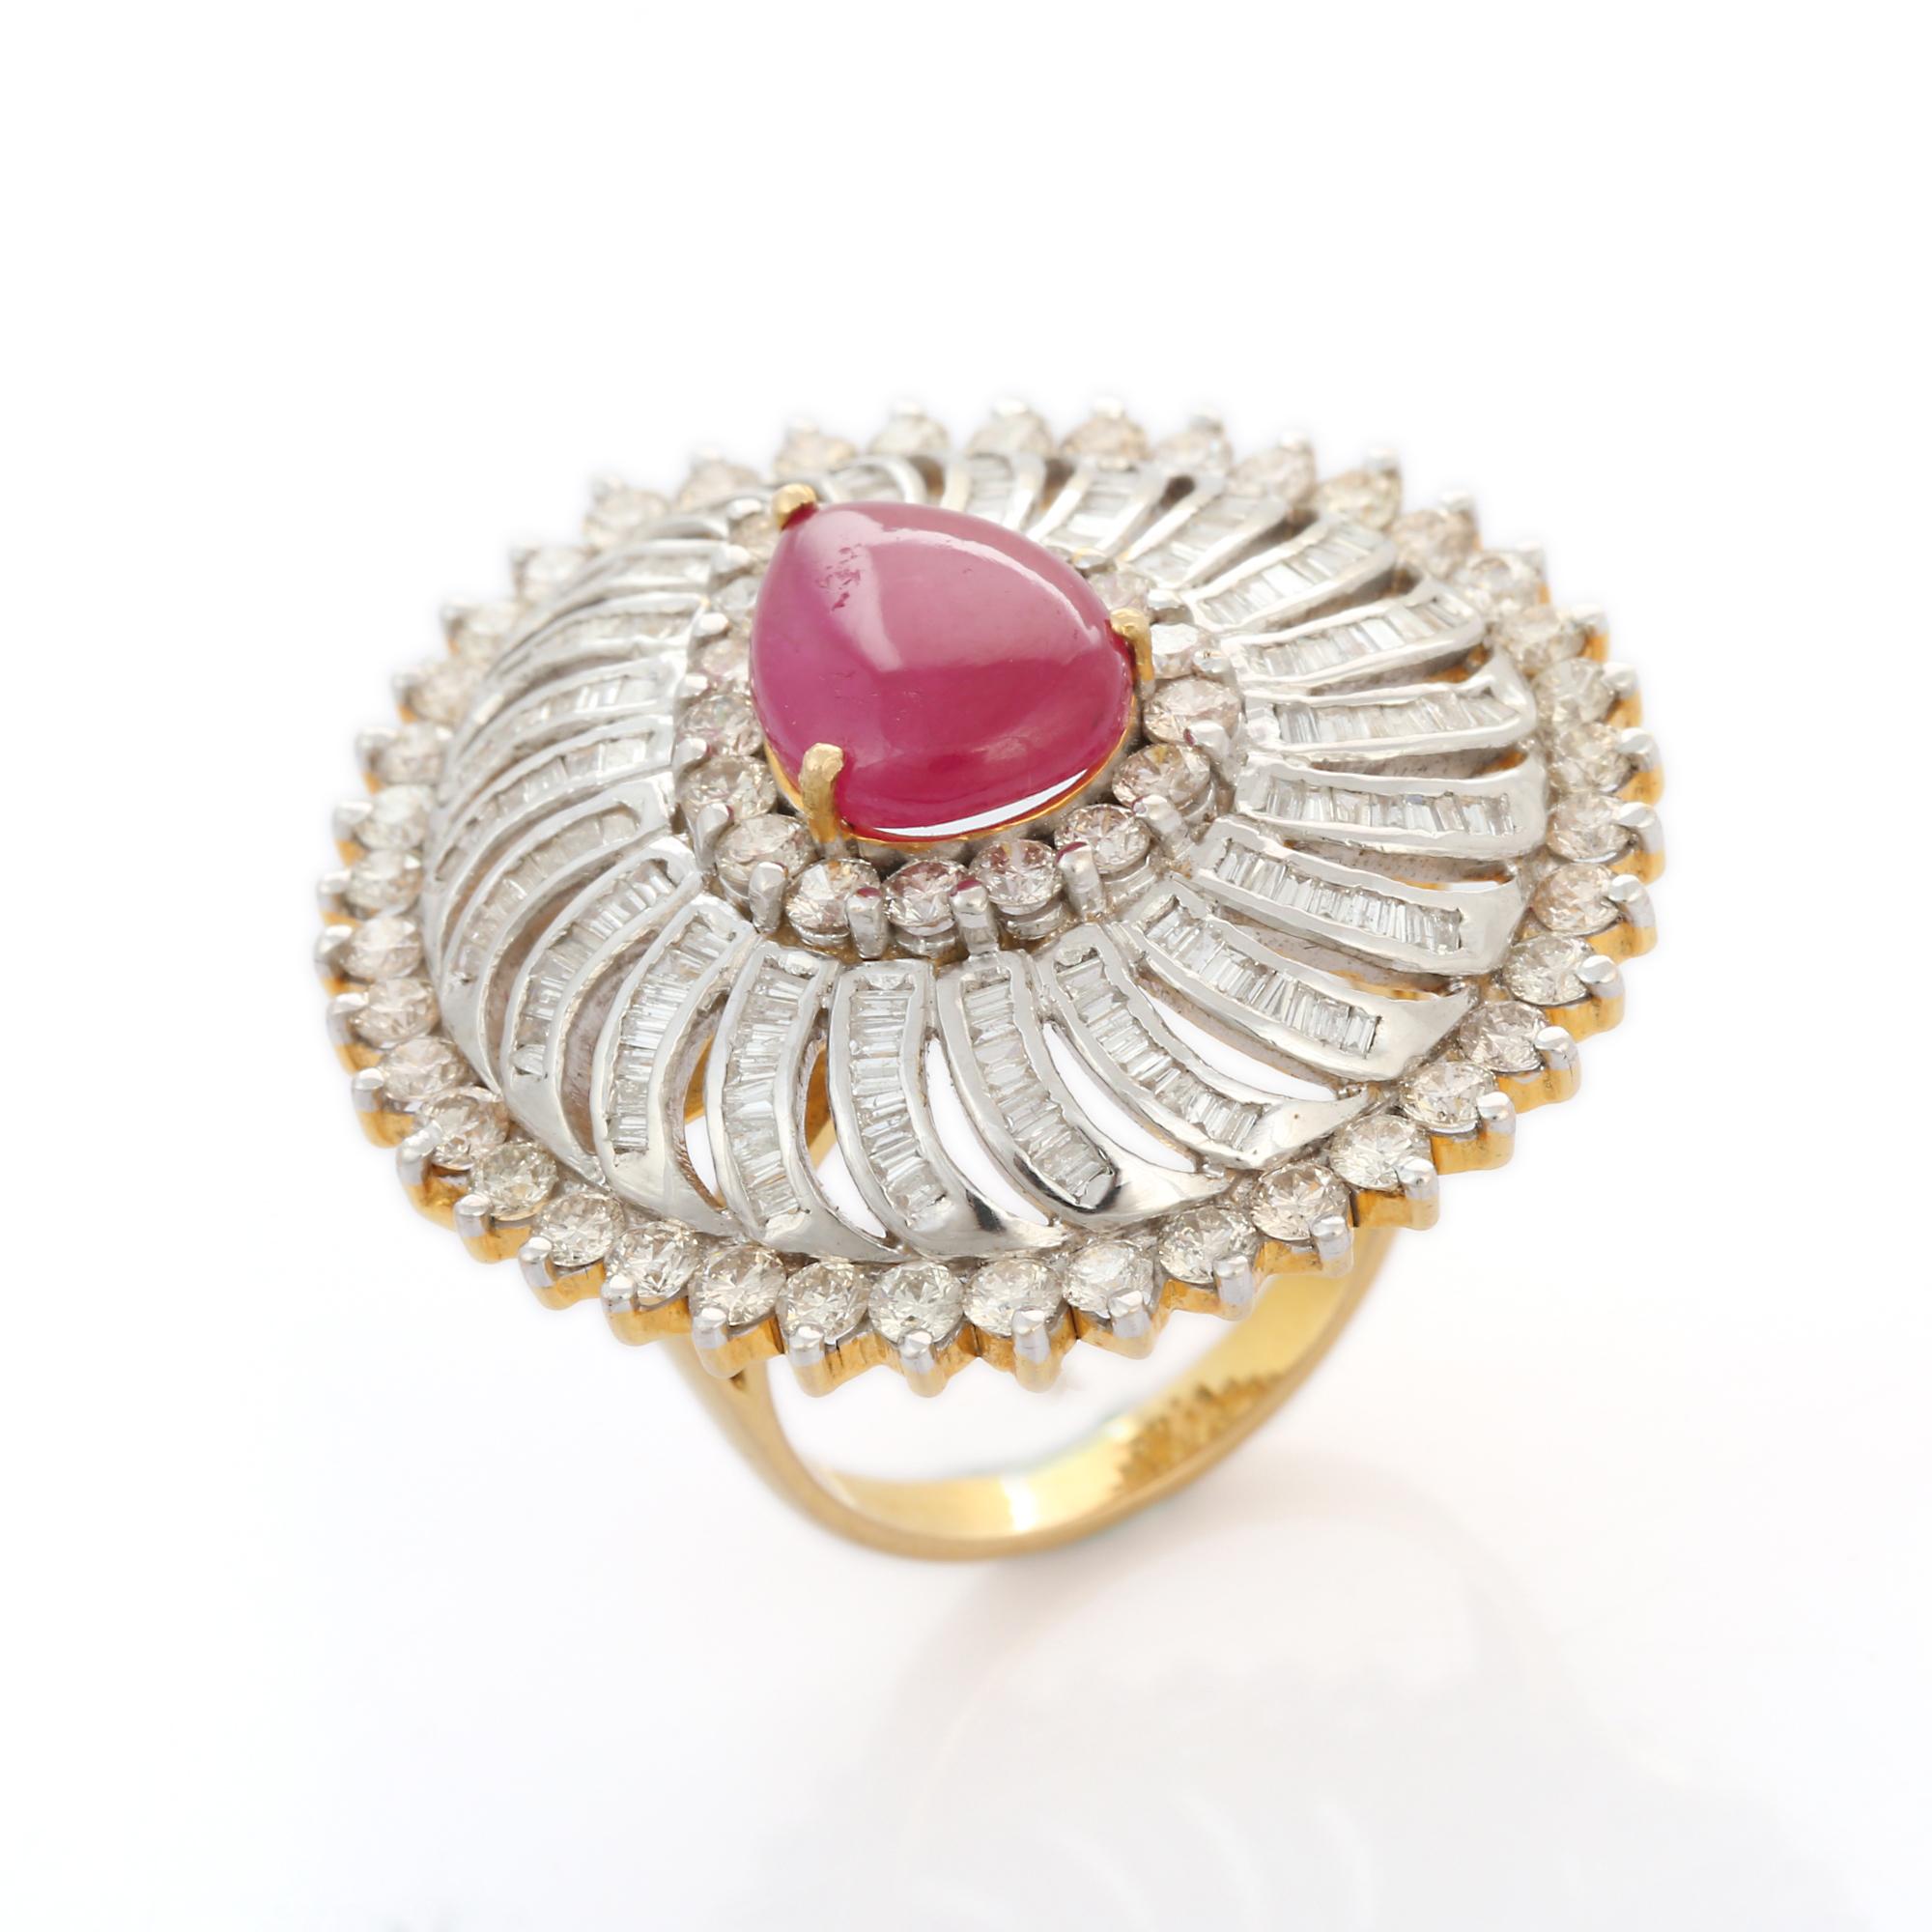 For Sale:  Statement Ruby Cocktail Ring with Halo of Diamonds in 14K White Gold 7